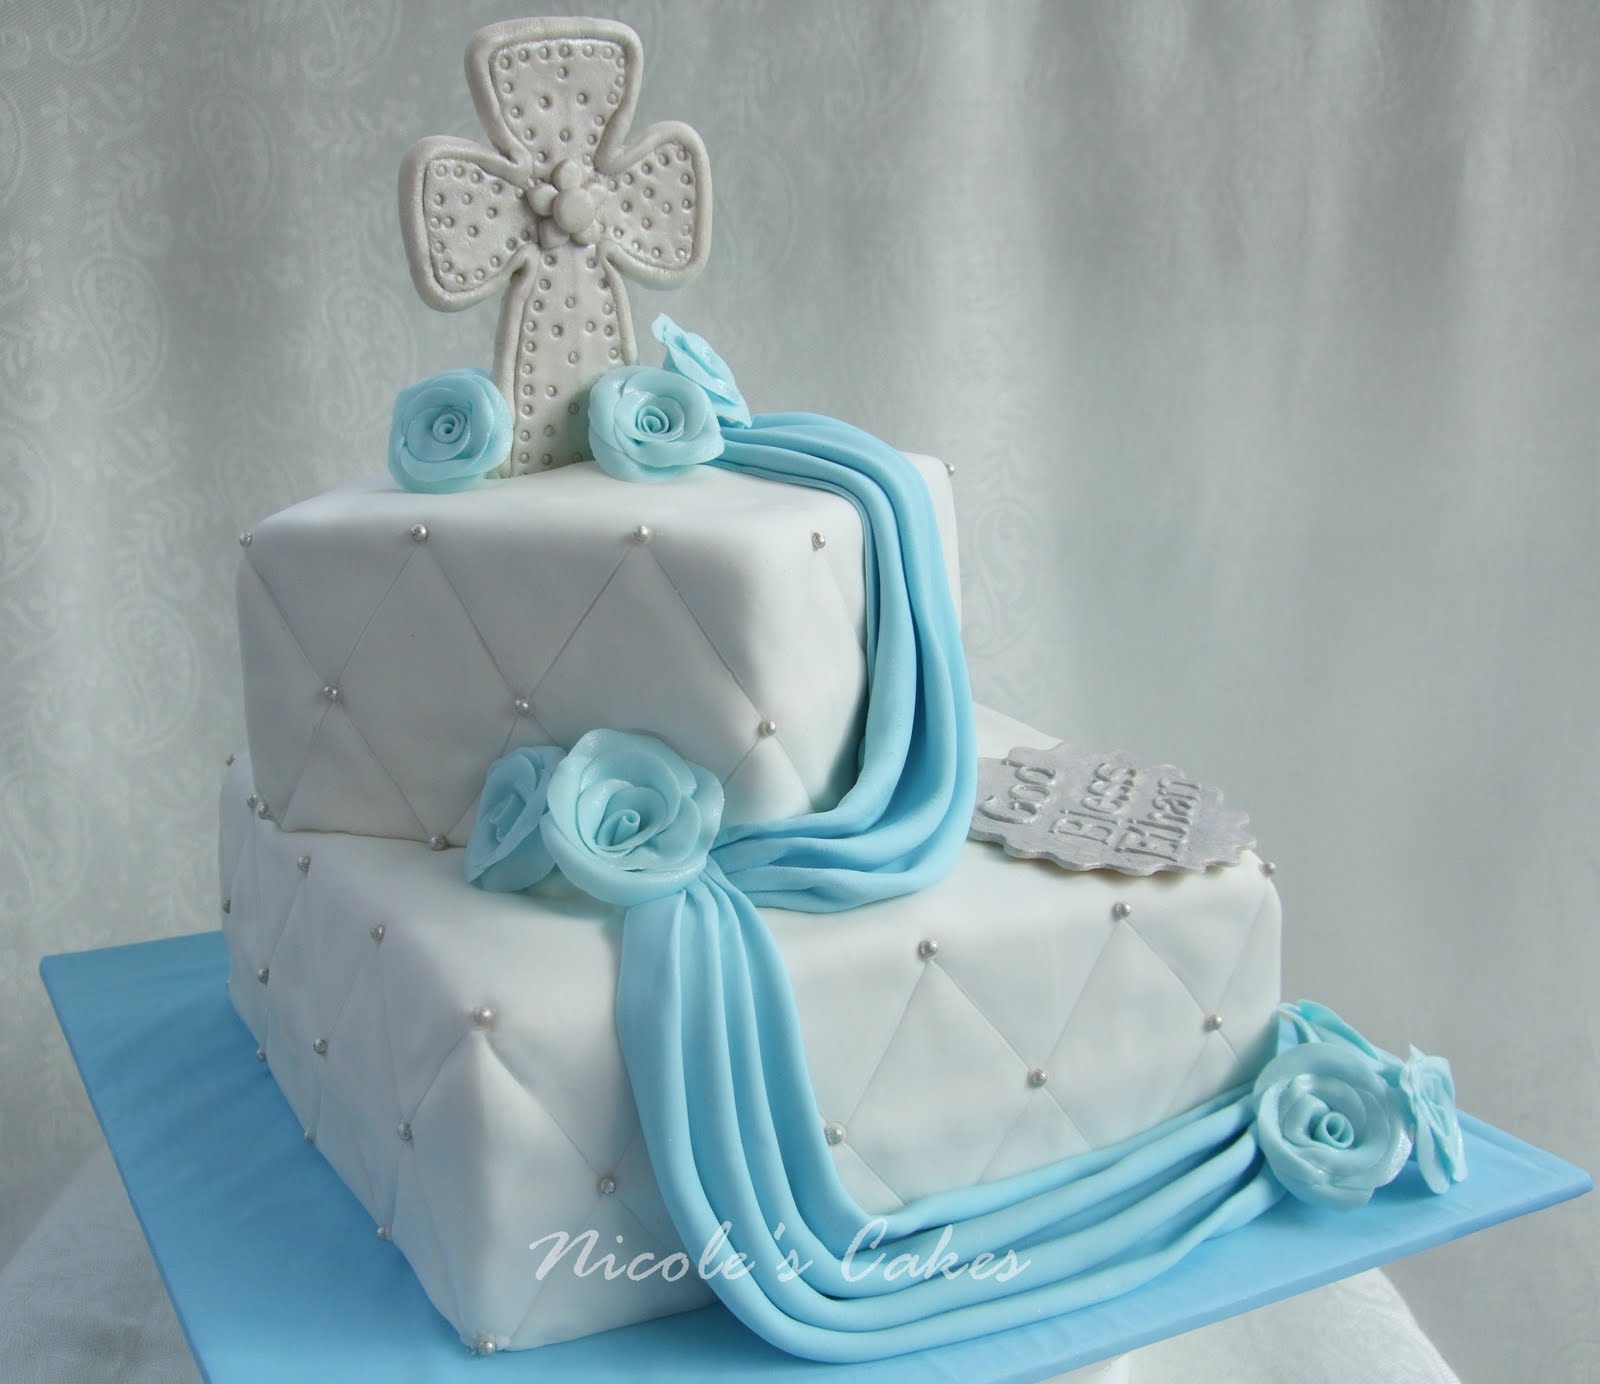 cool cake ideas for girls Confections, Cakes & Creations!